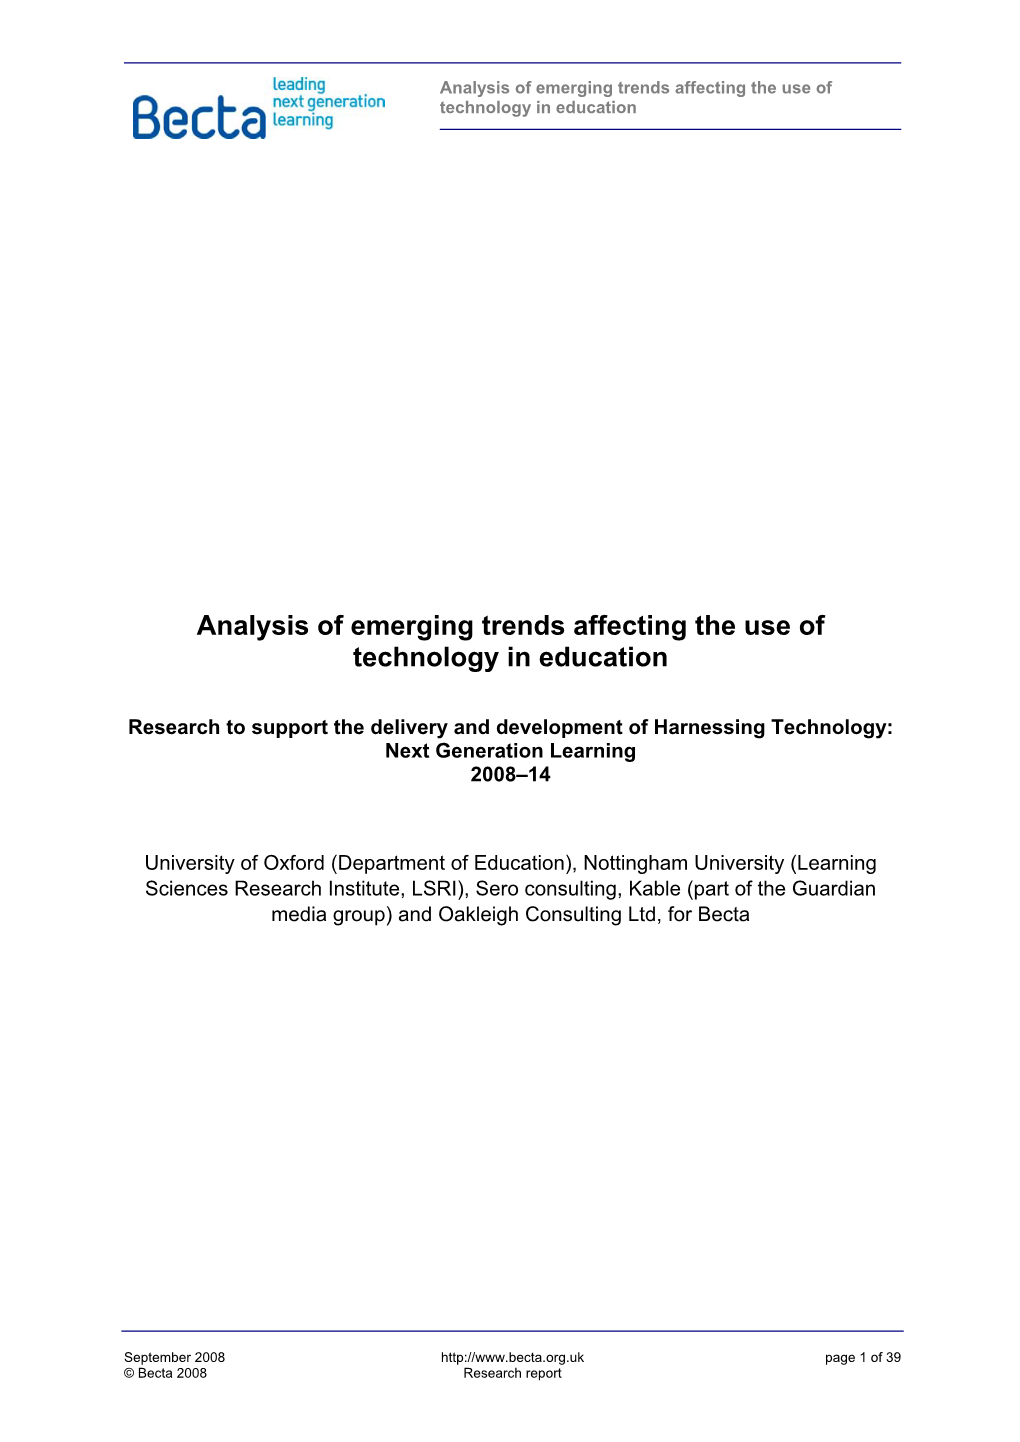 Analysis of Emerging Trends Affecting the Use of Technology in Education